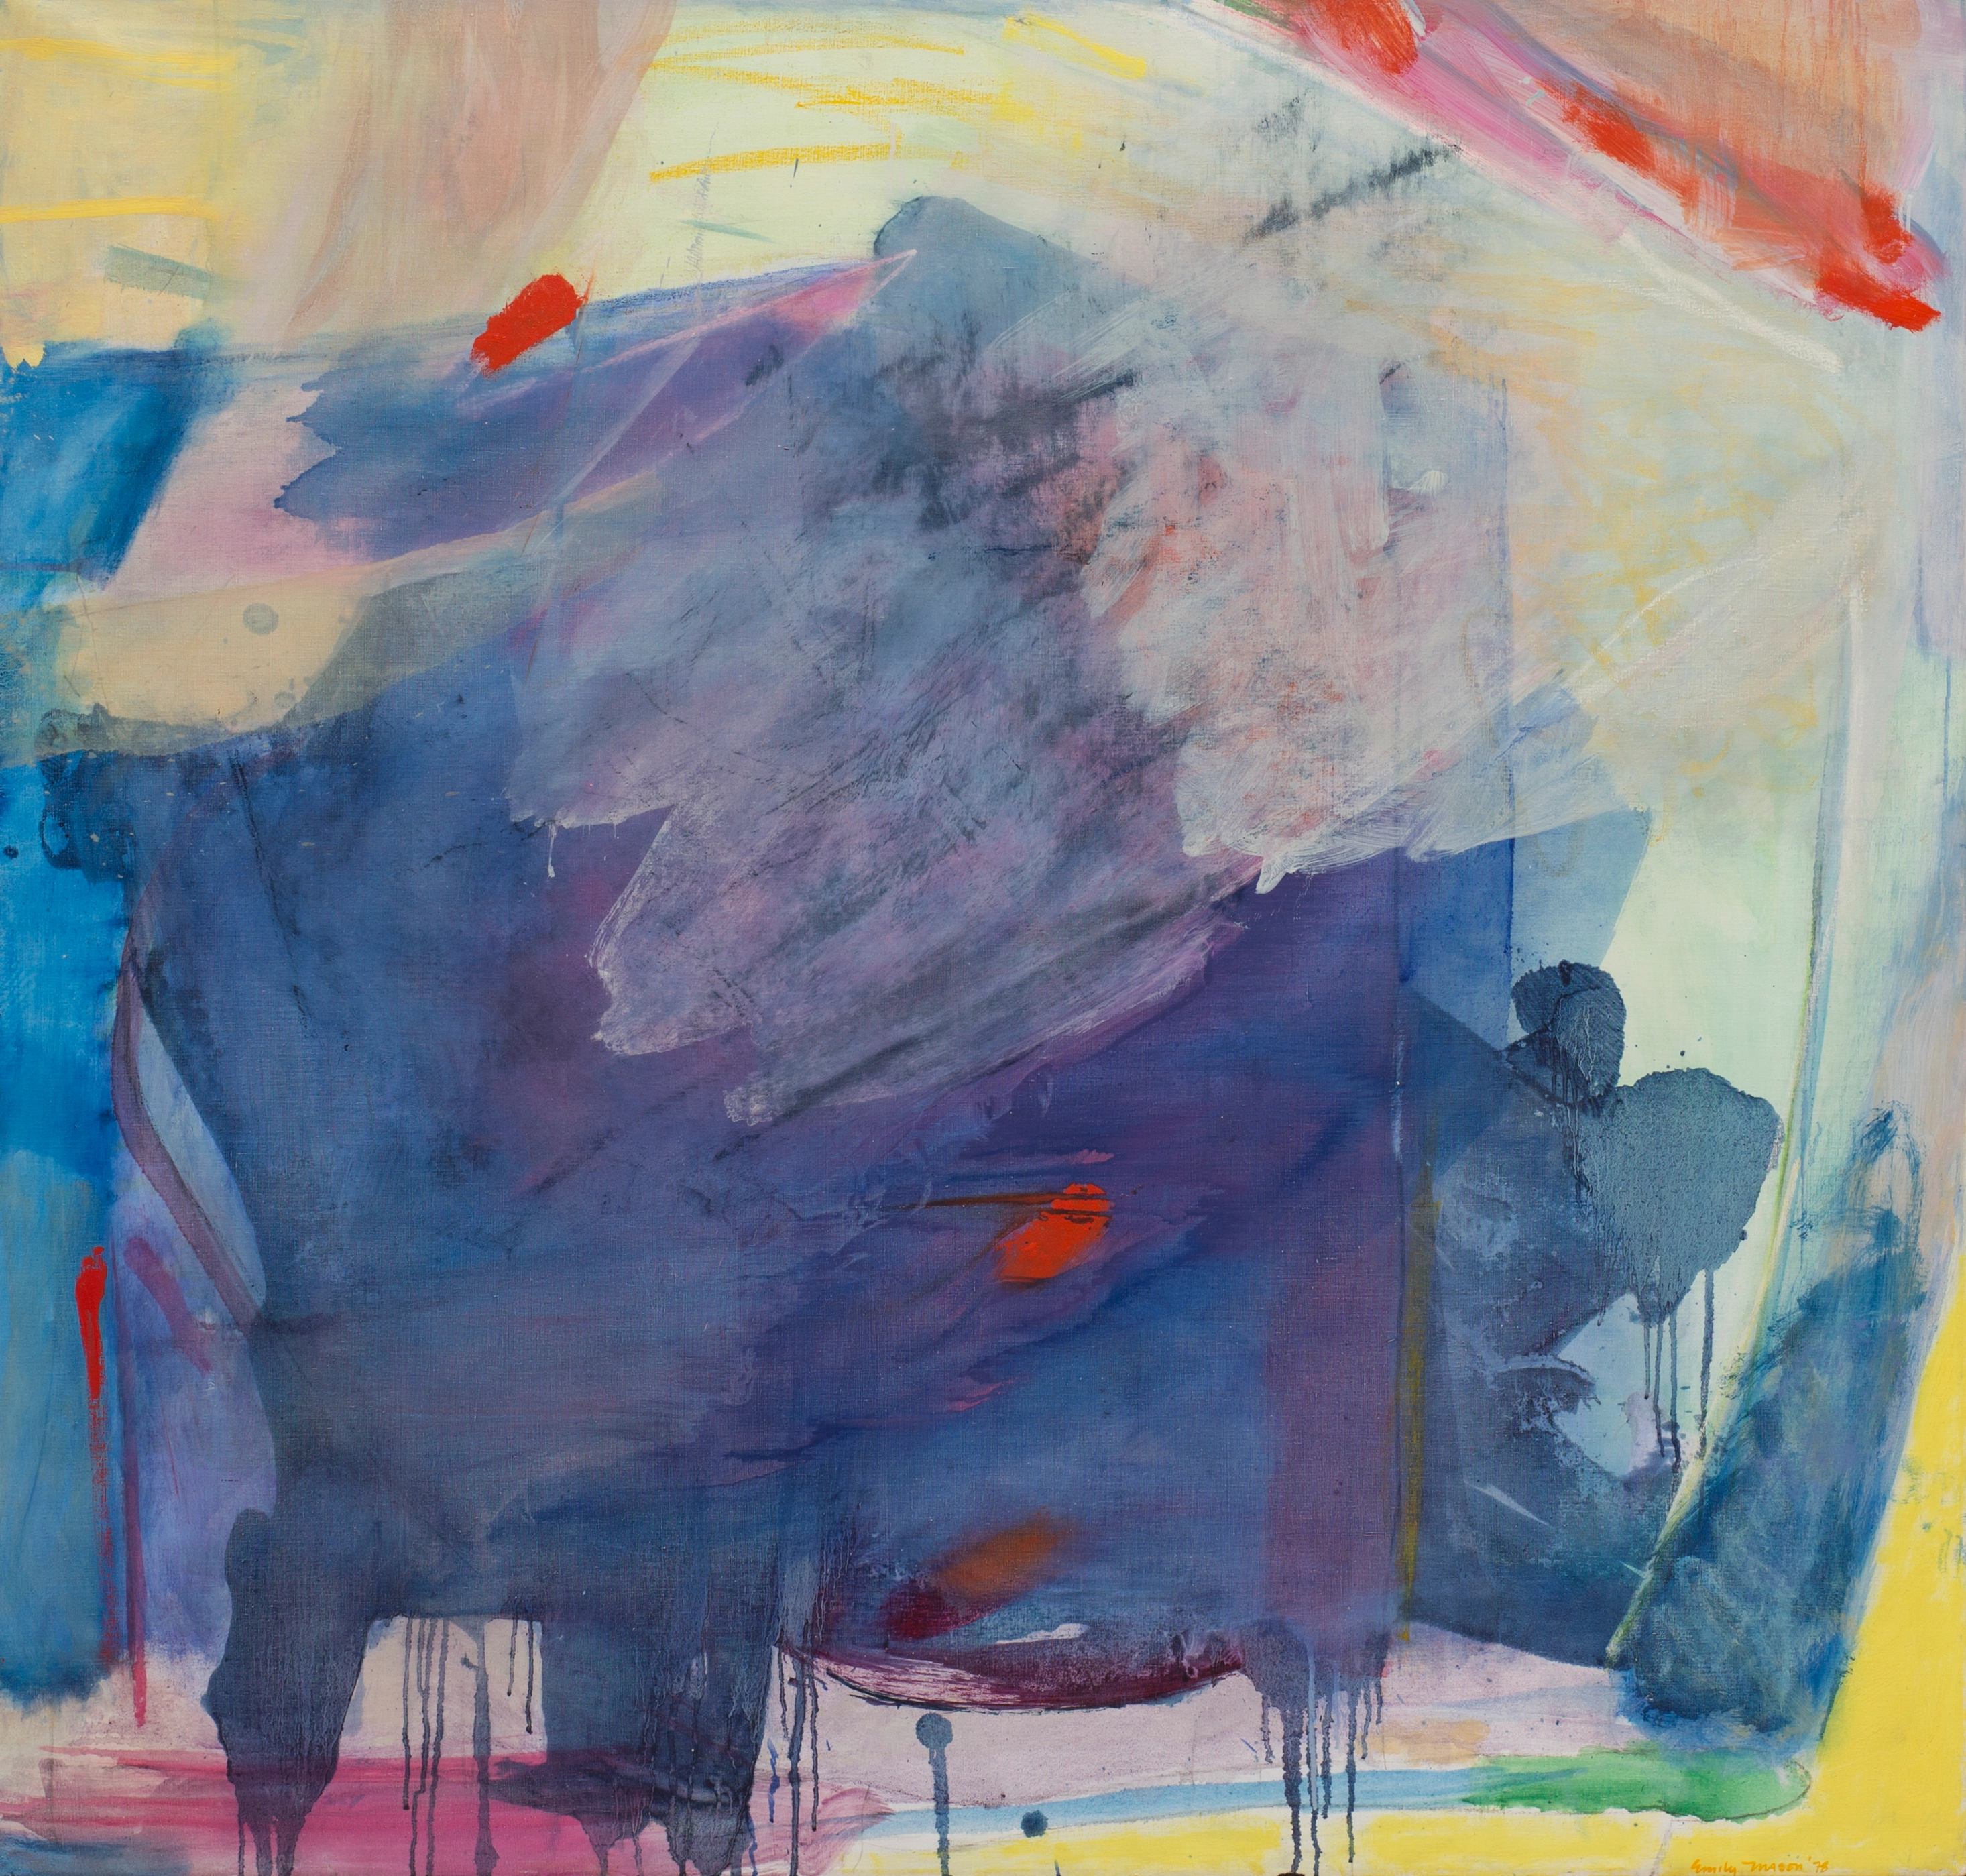 Image of an abstract painting with predominantly blue brushstrokes and washes of varying beige, pinks, and yellows.